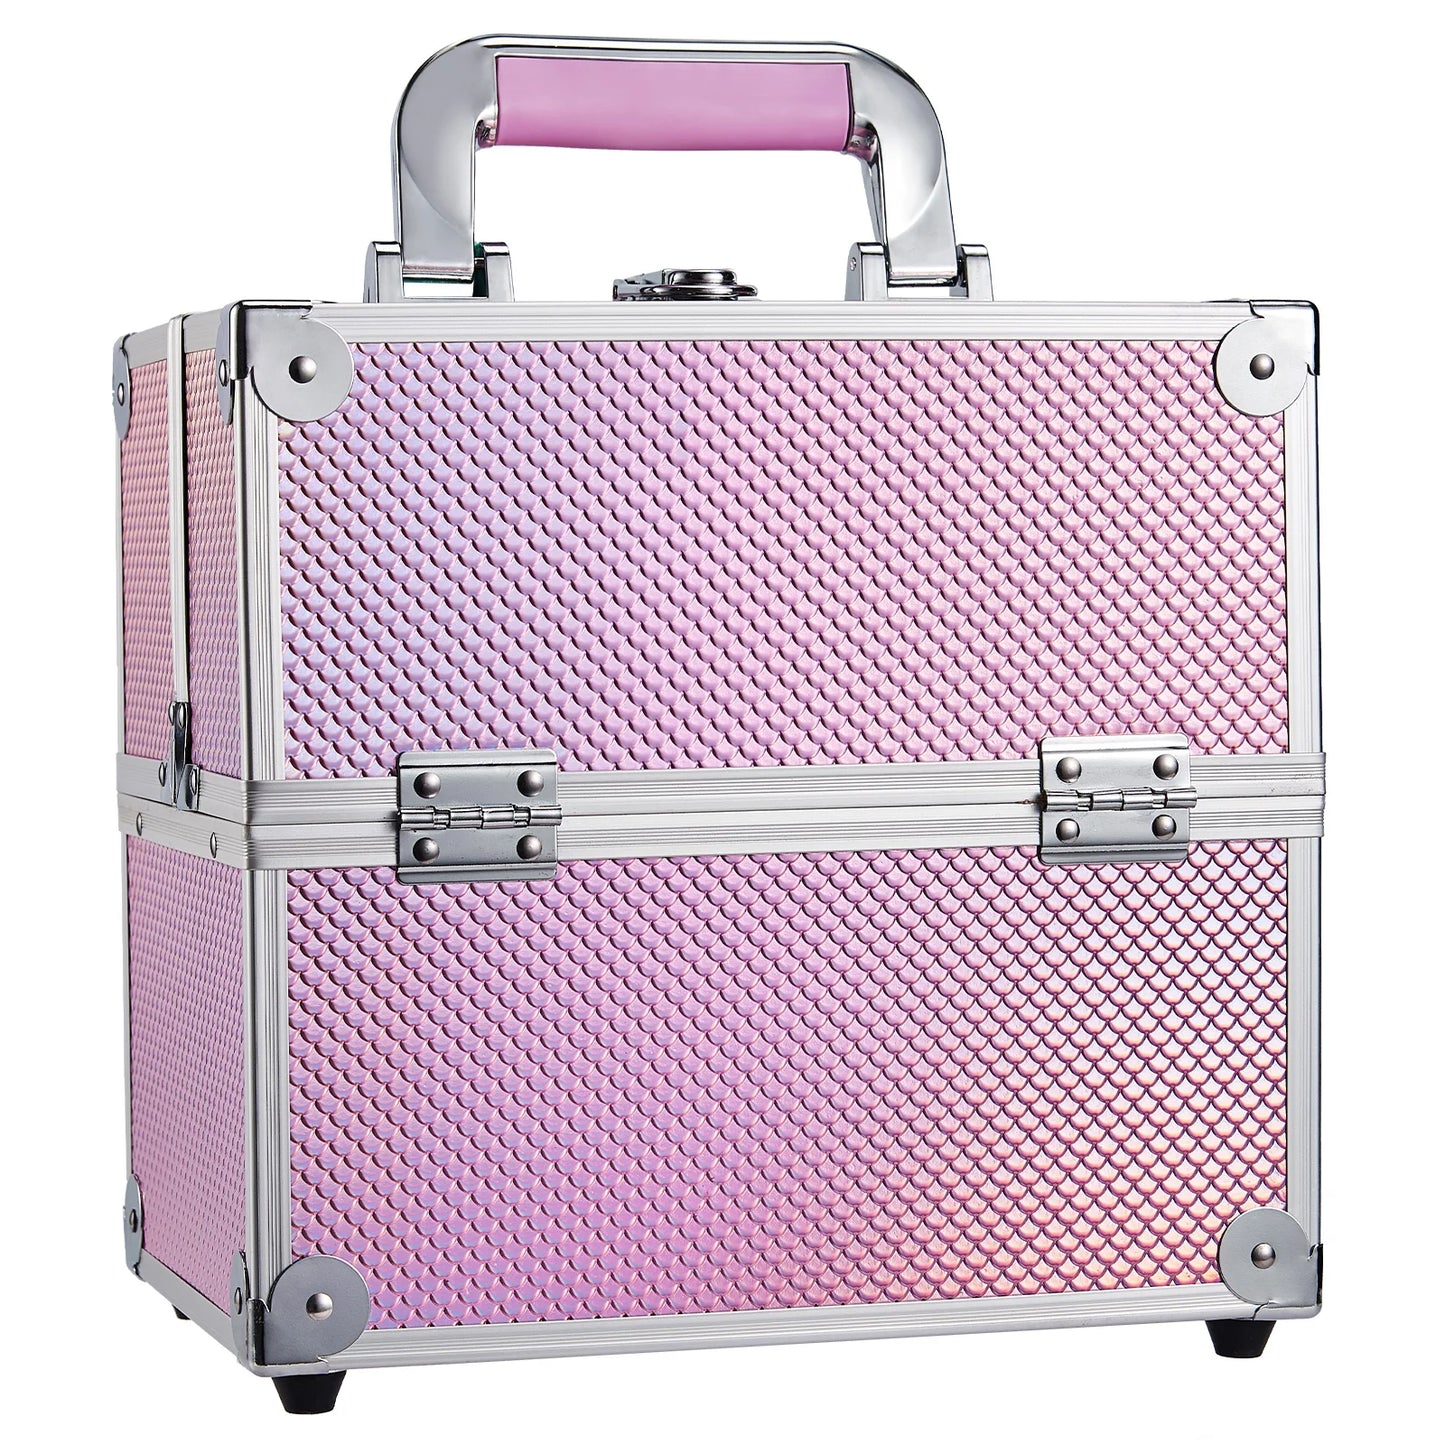 Portable travel, makeup case or organizer women's cosmetics, jewelry, and beauty products. - My Store